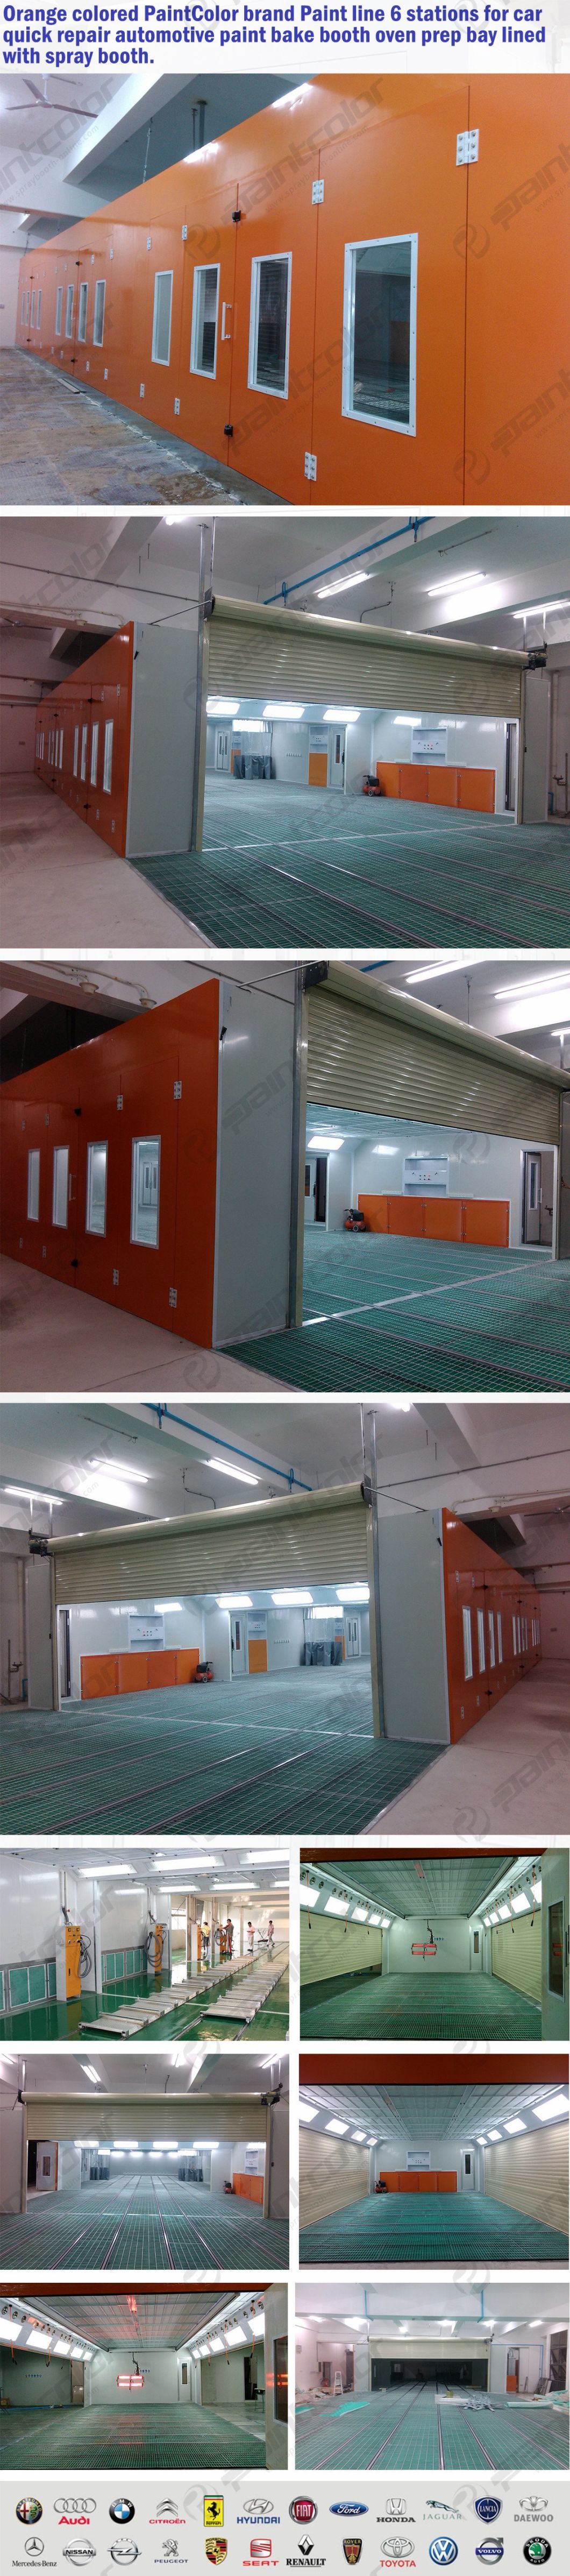 Painting Booth Compliant with Safety Regulations Automobile Car Paint Booth Price and Spray Baking Oven Paintcolor Brand